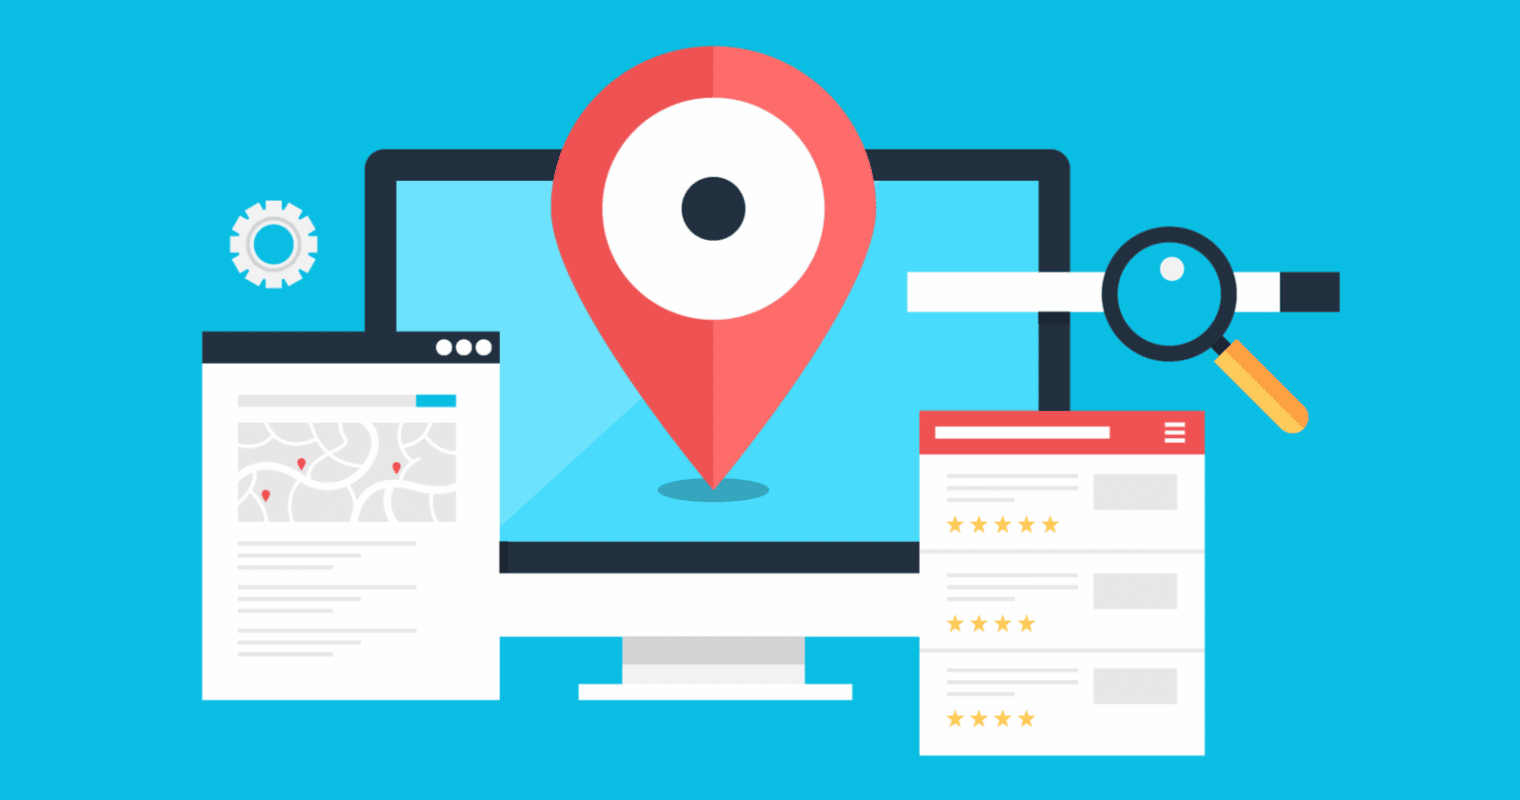 Do You Need Local SEO (Search Engine Optimization) Services?